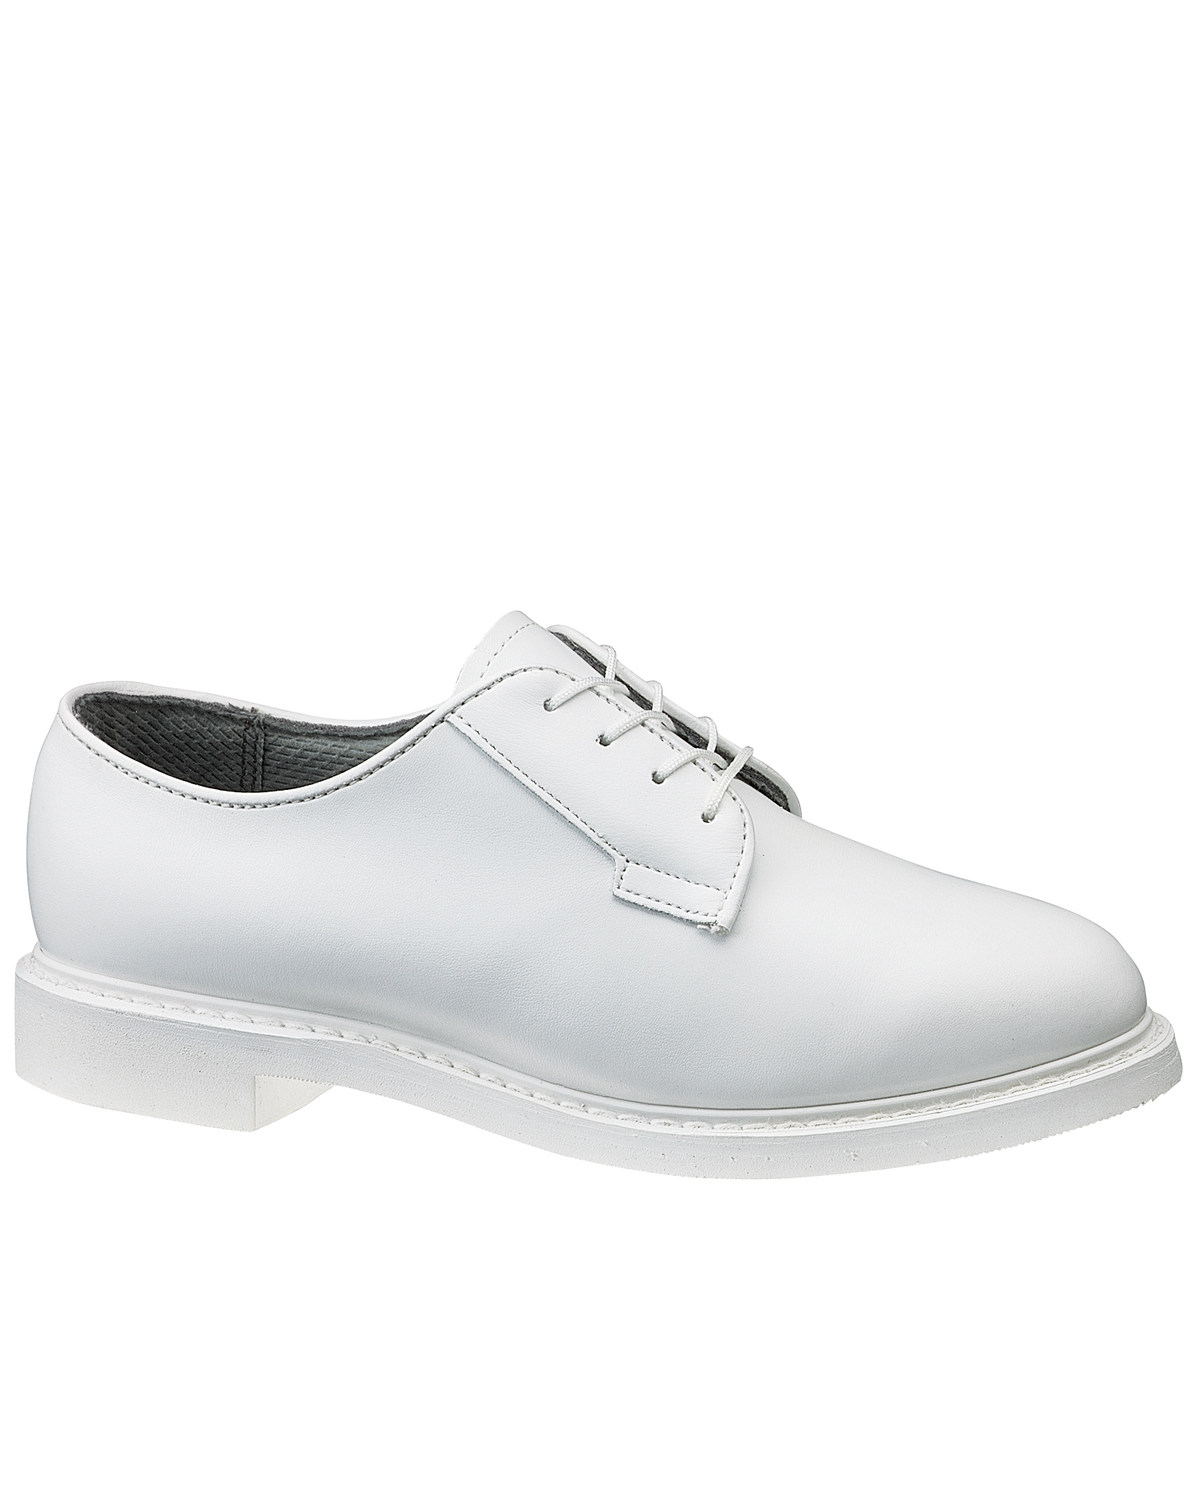 white leather oxford shoes womens